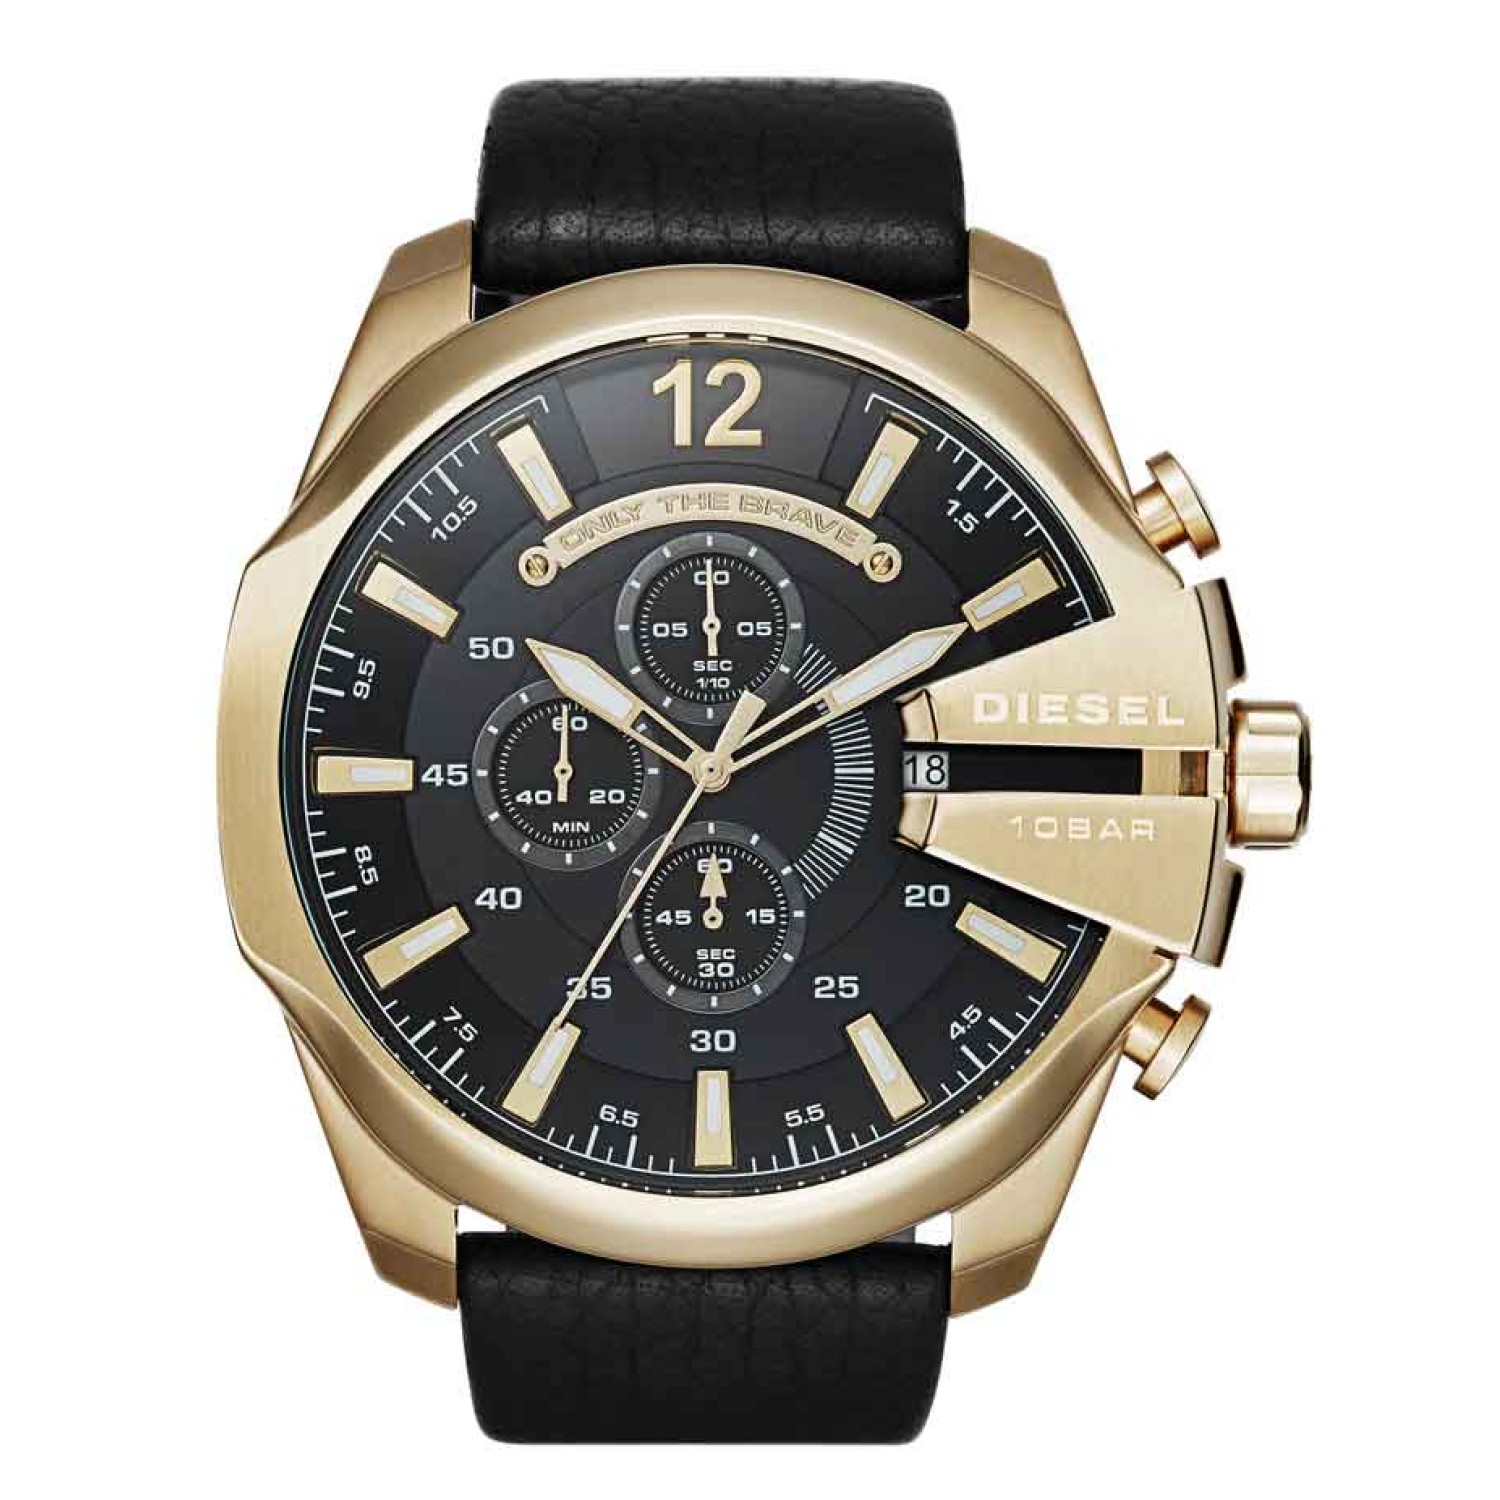 DZ4344 Diesel Master Chief Chronograph Watch. This oversized gents Diesel Mega Chief watch has a IP gold plated case and is fitted with an analogue chronograph quartz movement. It is fastened with a black leather strap and has a black dial. The watch has 